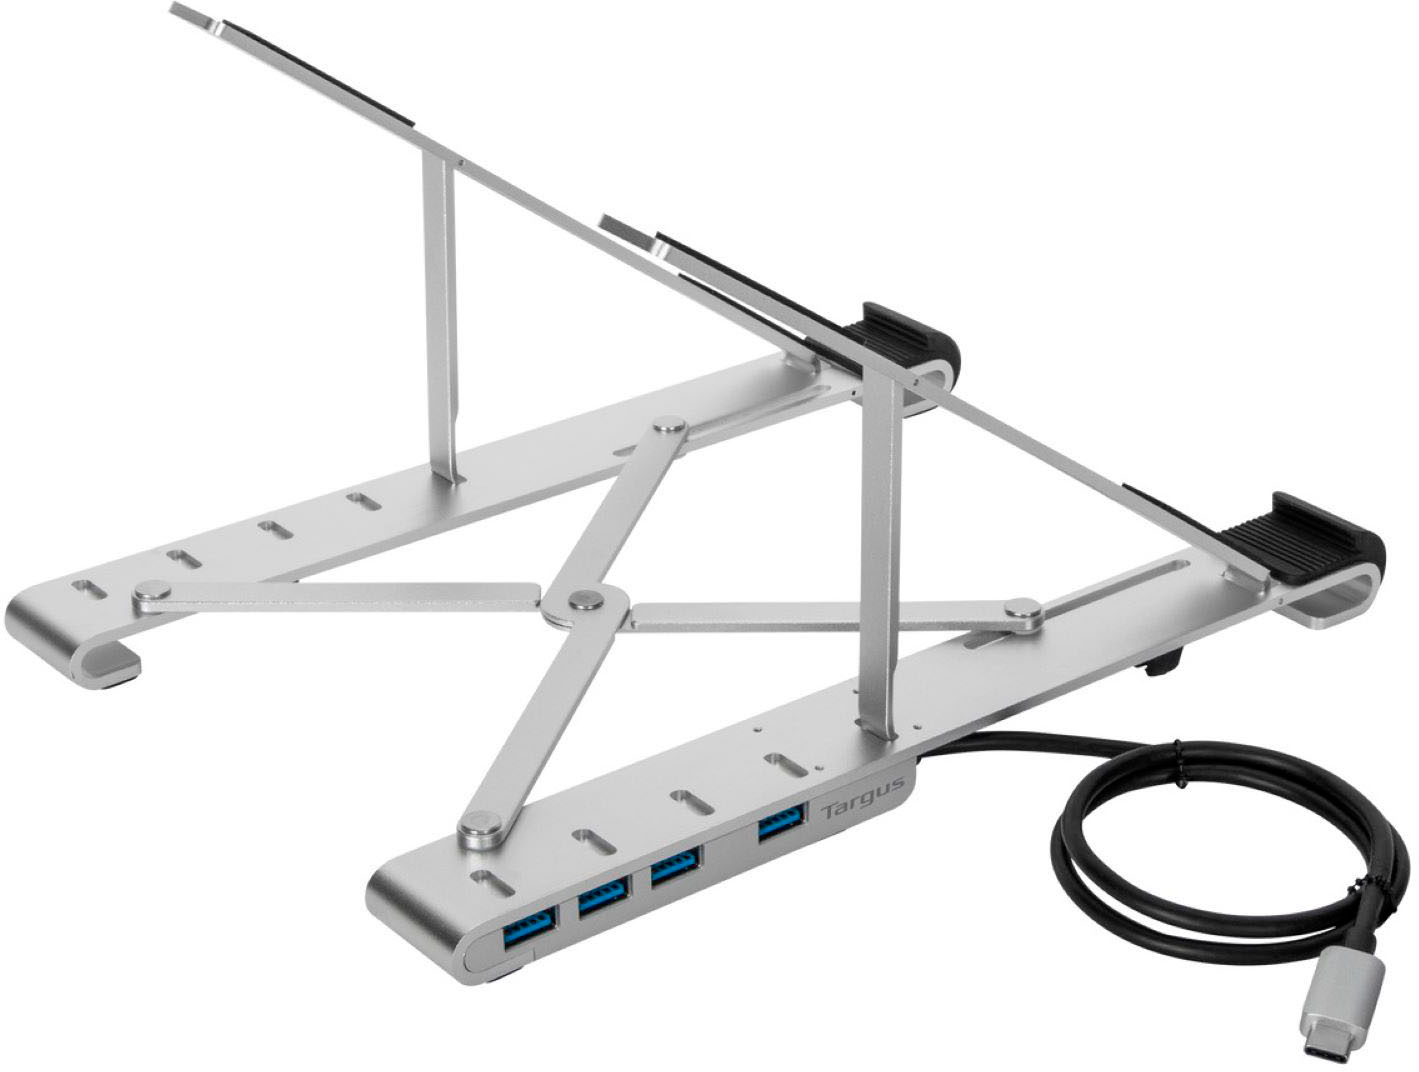 Insignia™ Ergonomic Laptop Stand with Adjustable Height and Angle for  Laptops up to 17 Wide Silver NS-PLSEA1 - Best Buy